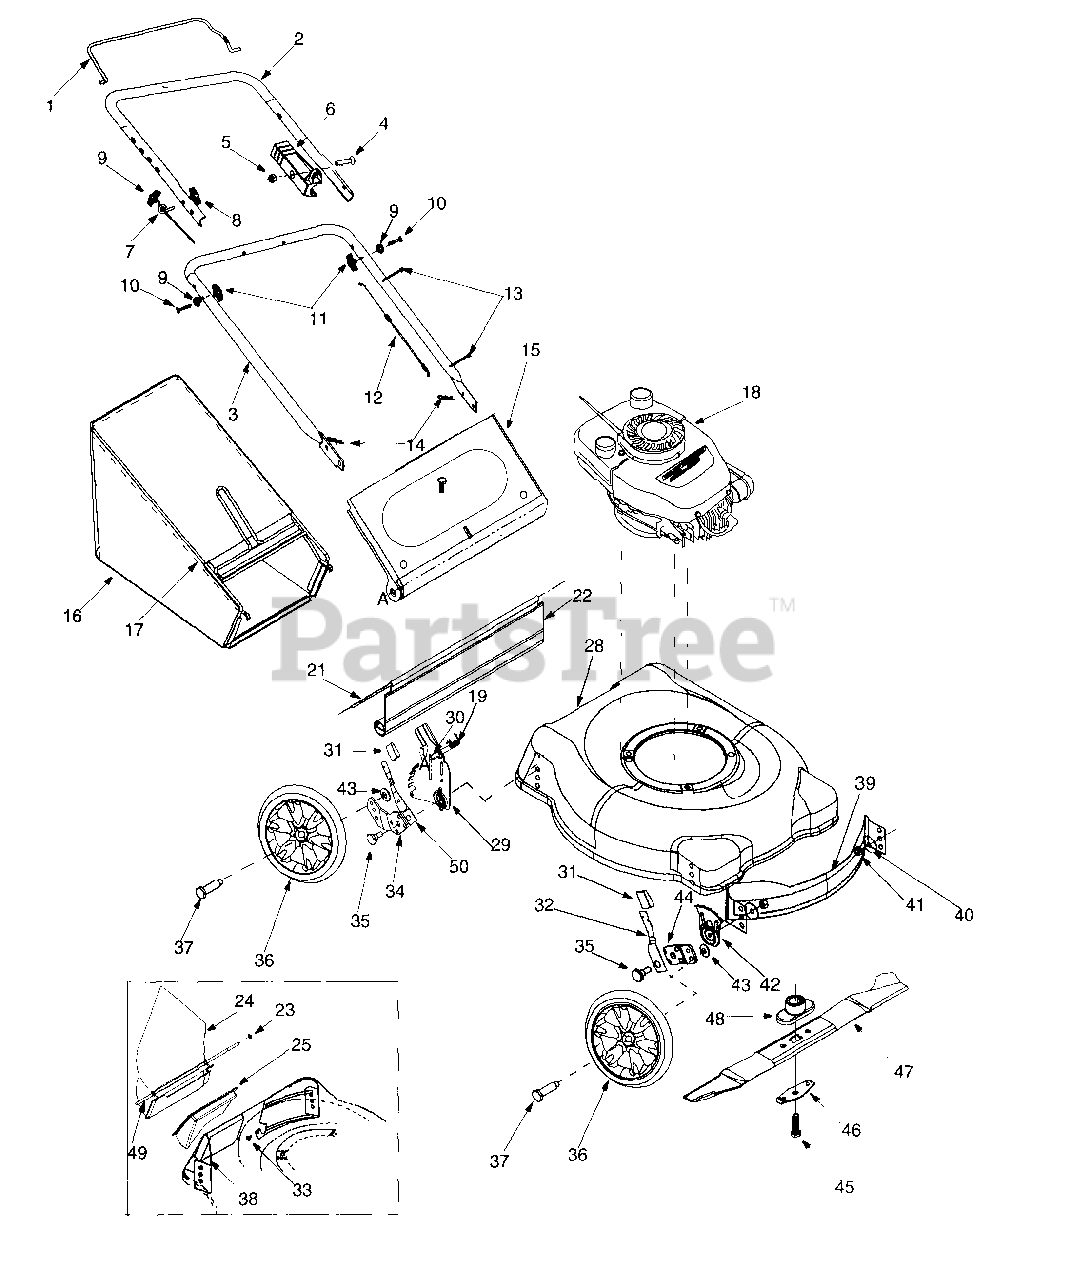 4 0 H P Lawn Mower Parts Lookup With